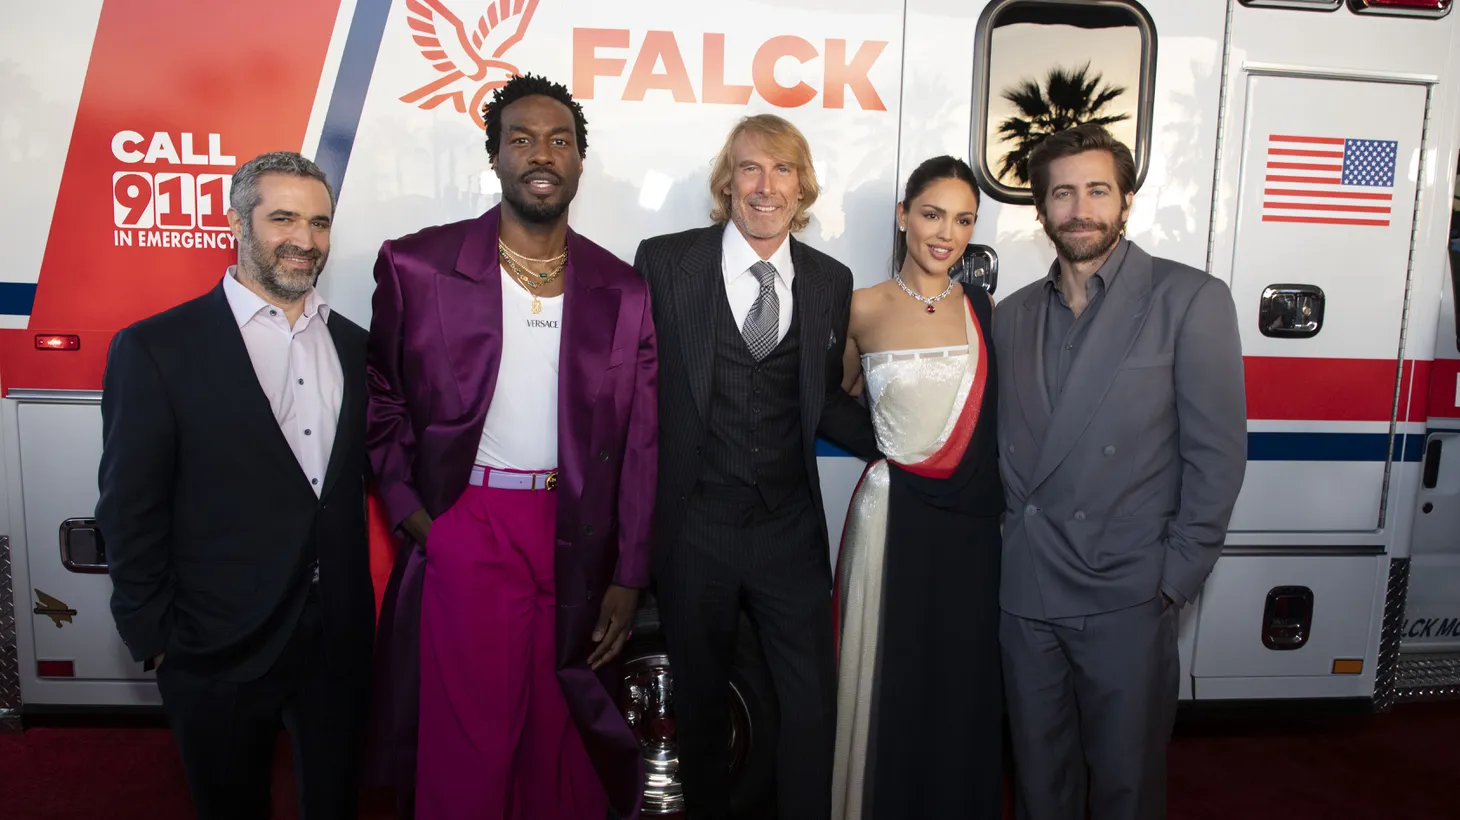 L to R: Producer Brad Fischer, Yahya Abdul-Mateen II, director/producer Michael Bay, Eiza González, and Jake Gyllenhaal attend the “Ambulance” premiere at the Academy Museum of Motion Pictures in Los Angeles, CA on April 4, 2022.